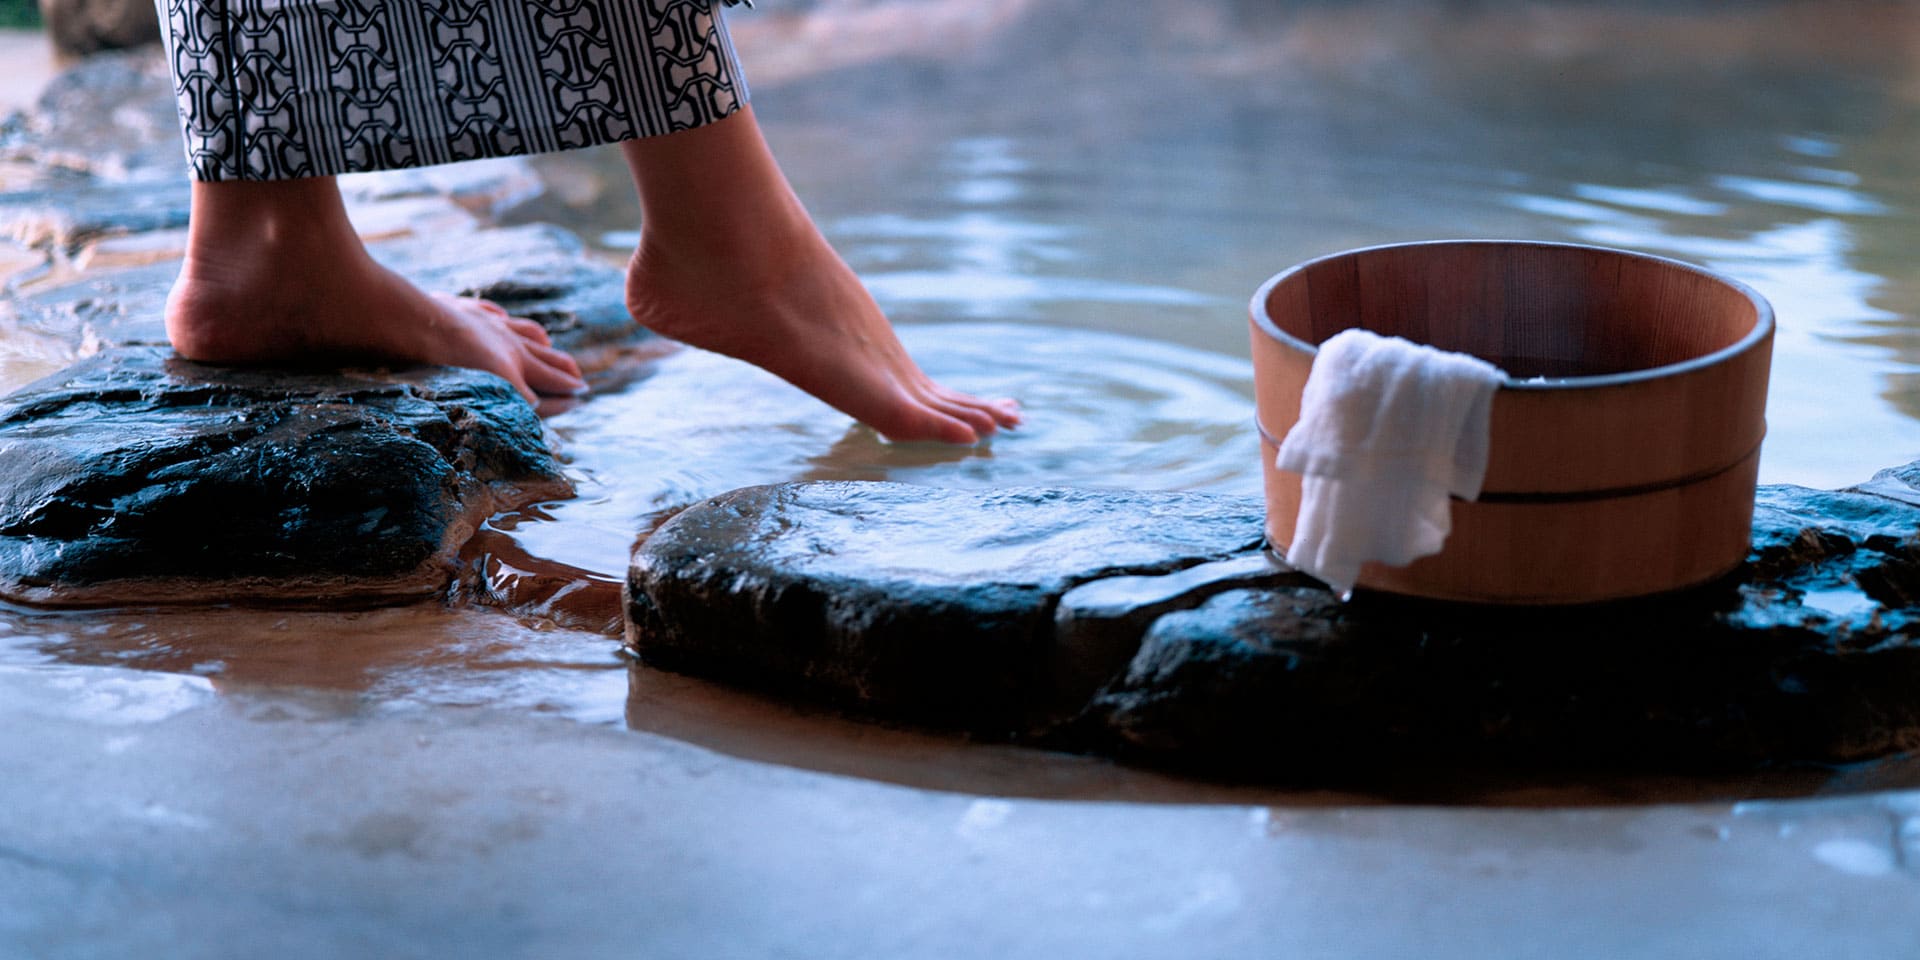 Take time to learn about Onsen culture before travelling to Japan